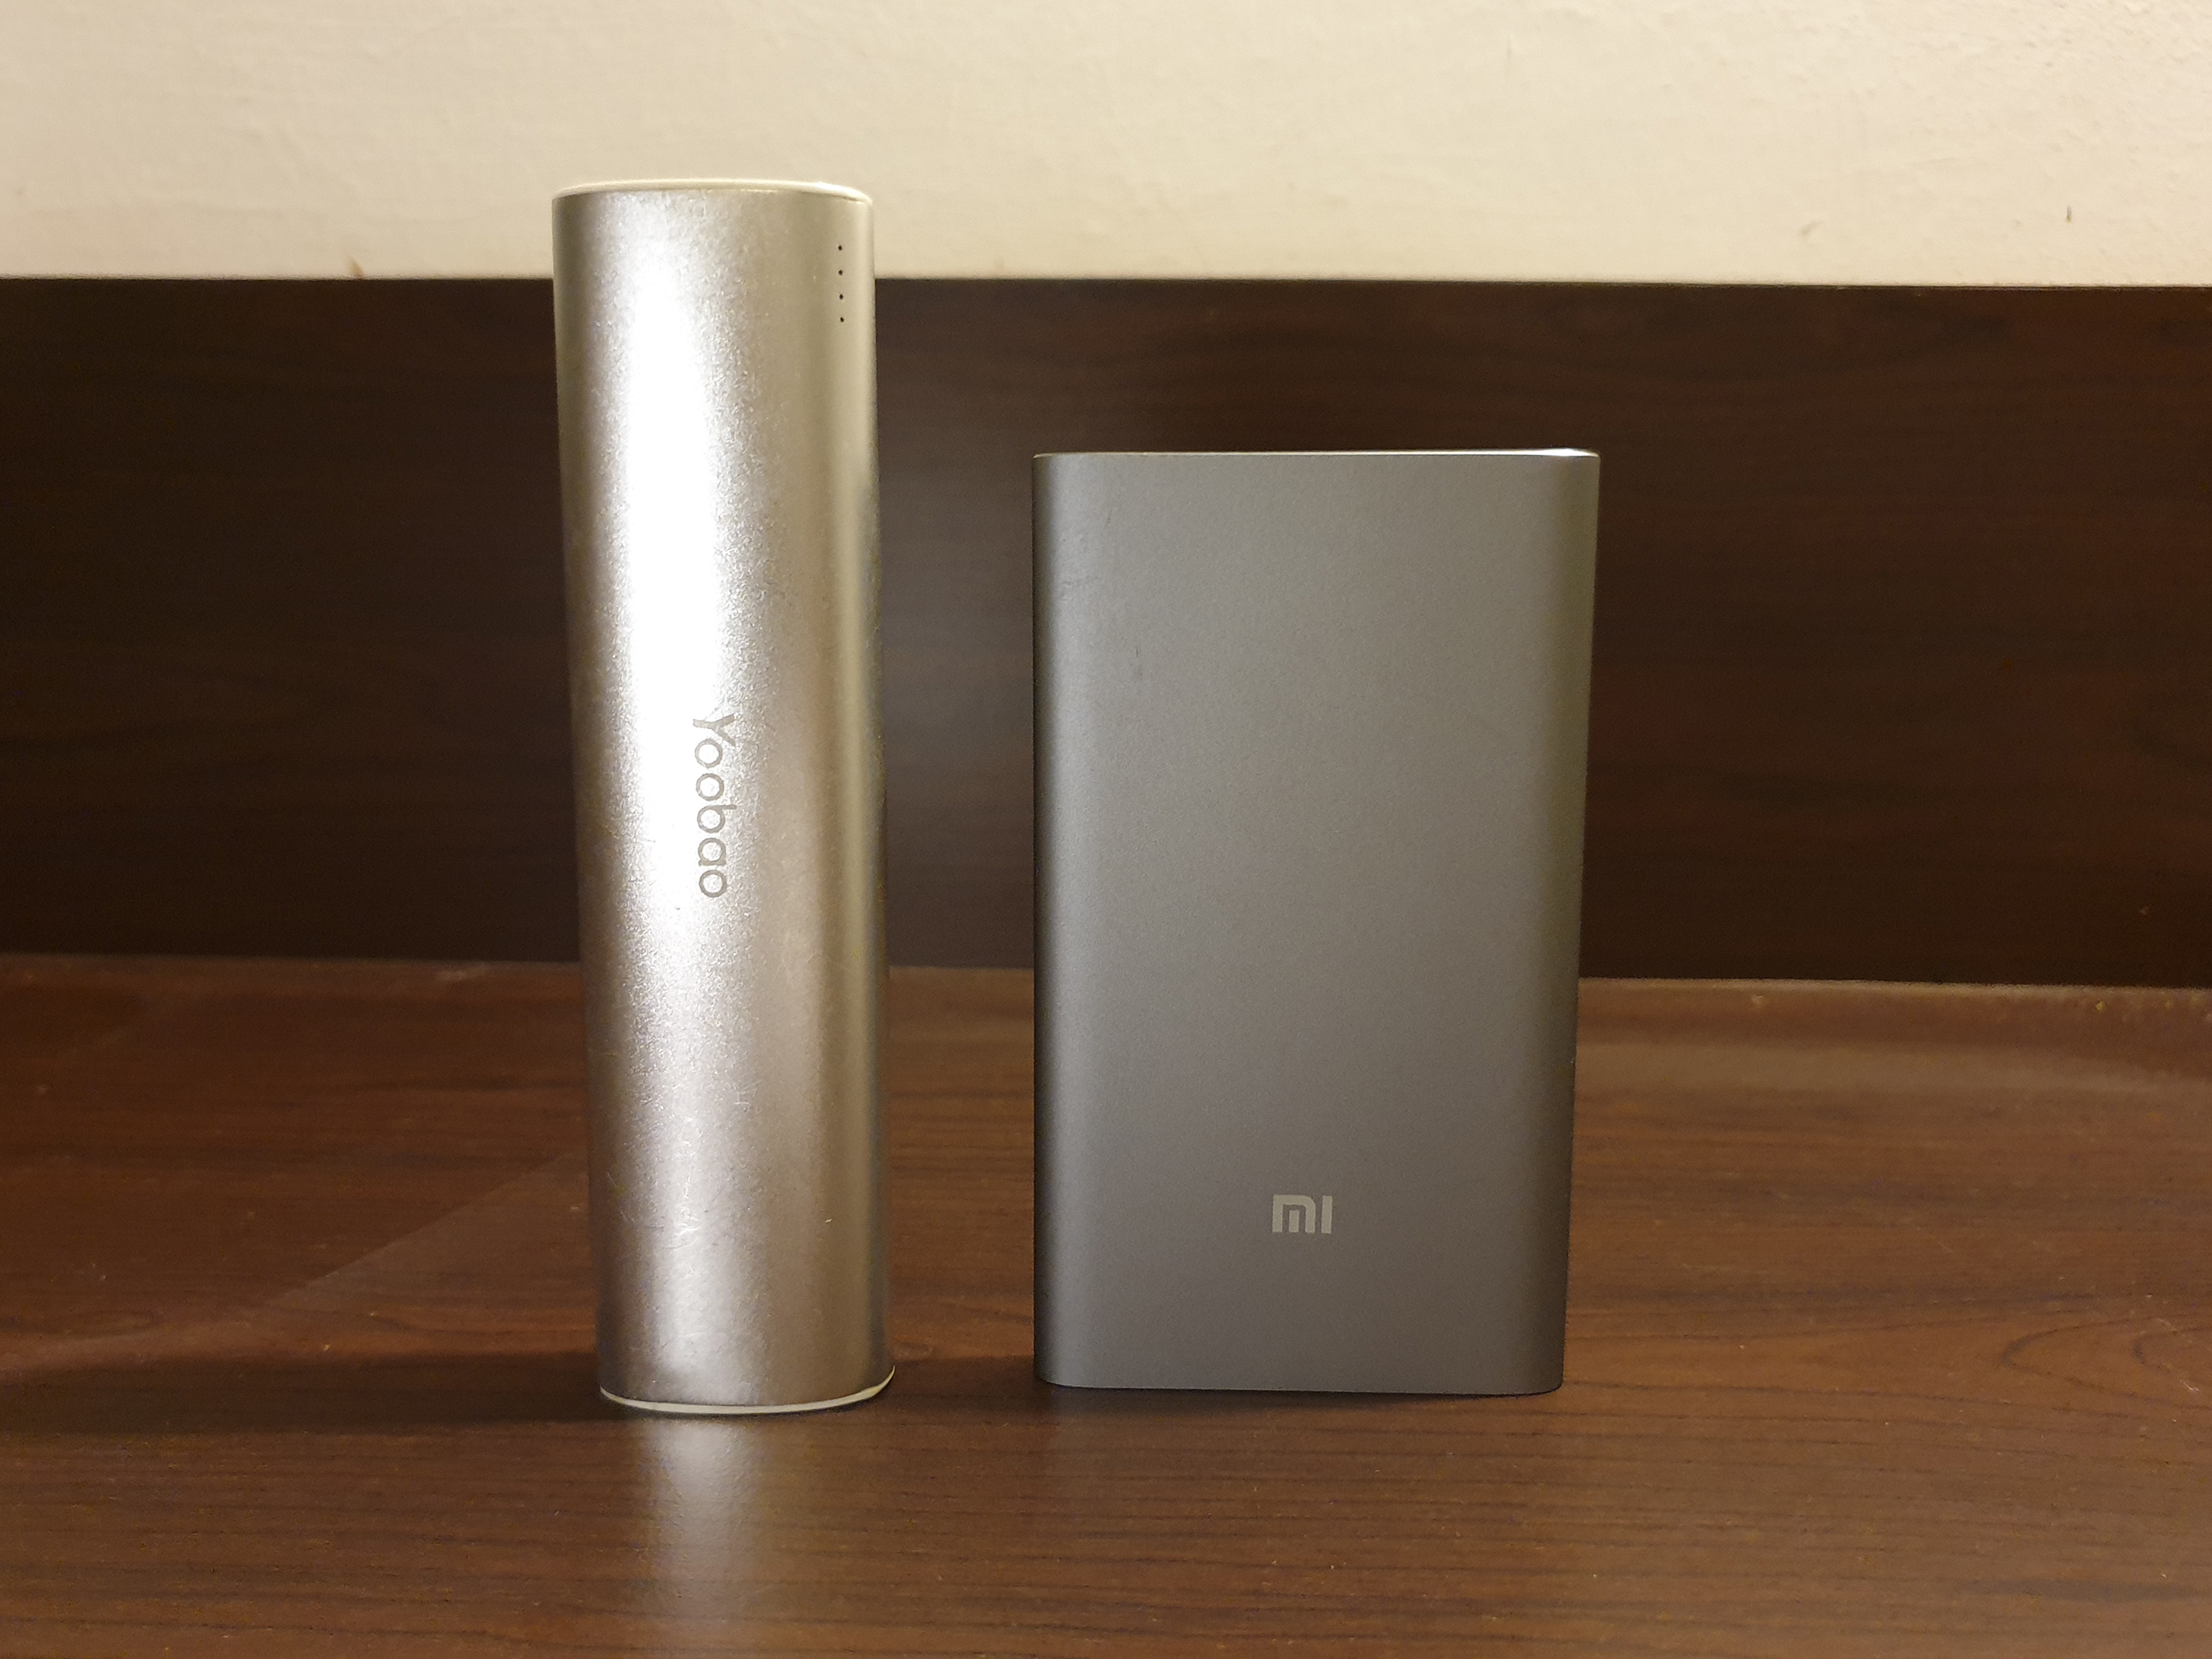 Power Bank Size Compare